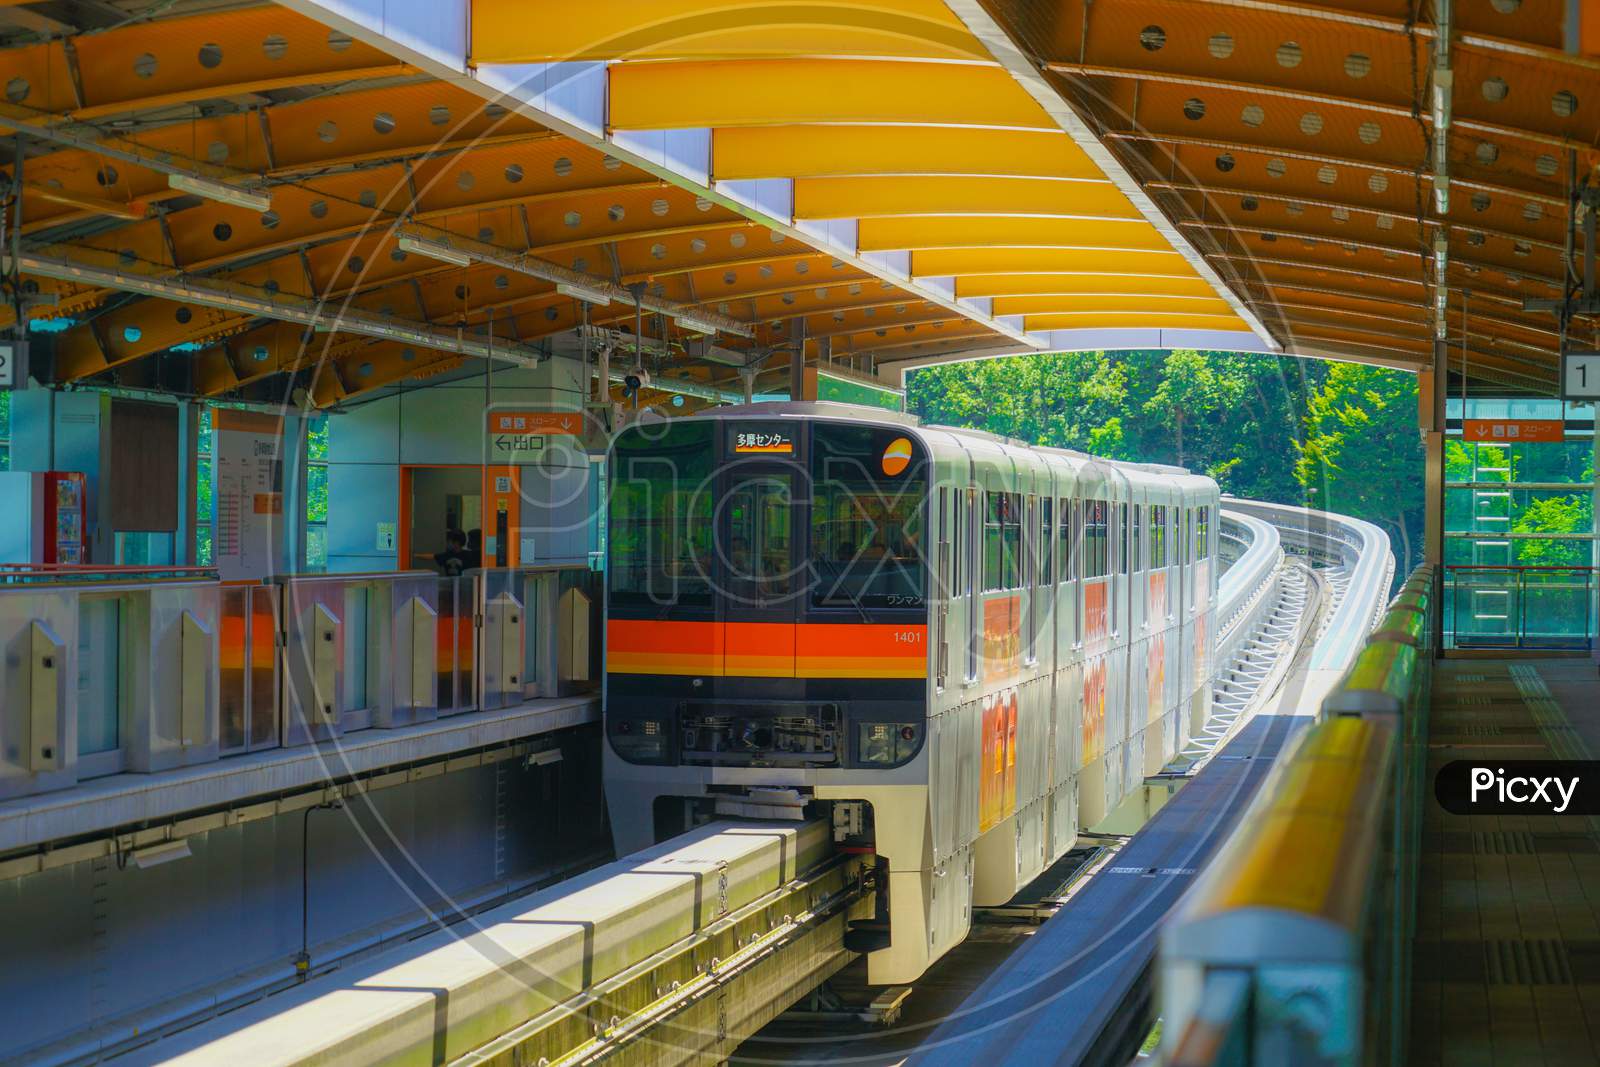 Tama Zoological Park Station Of The Home (Tama City Monorail)